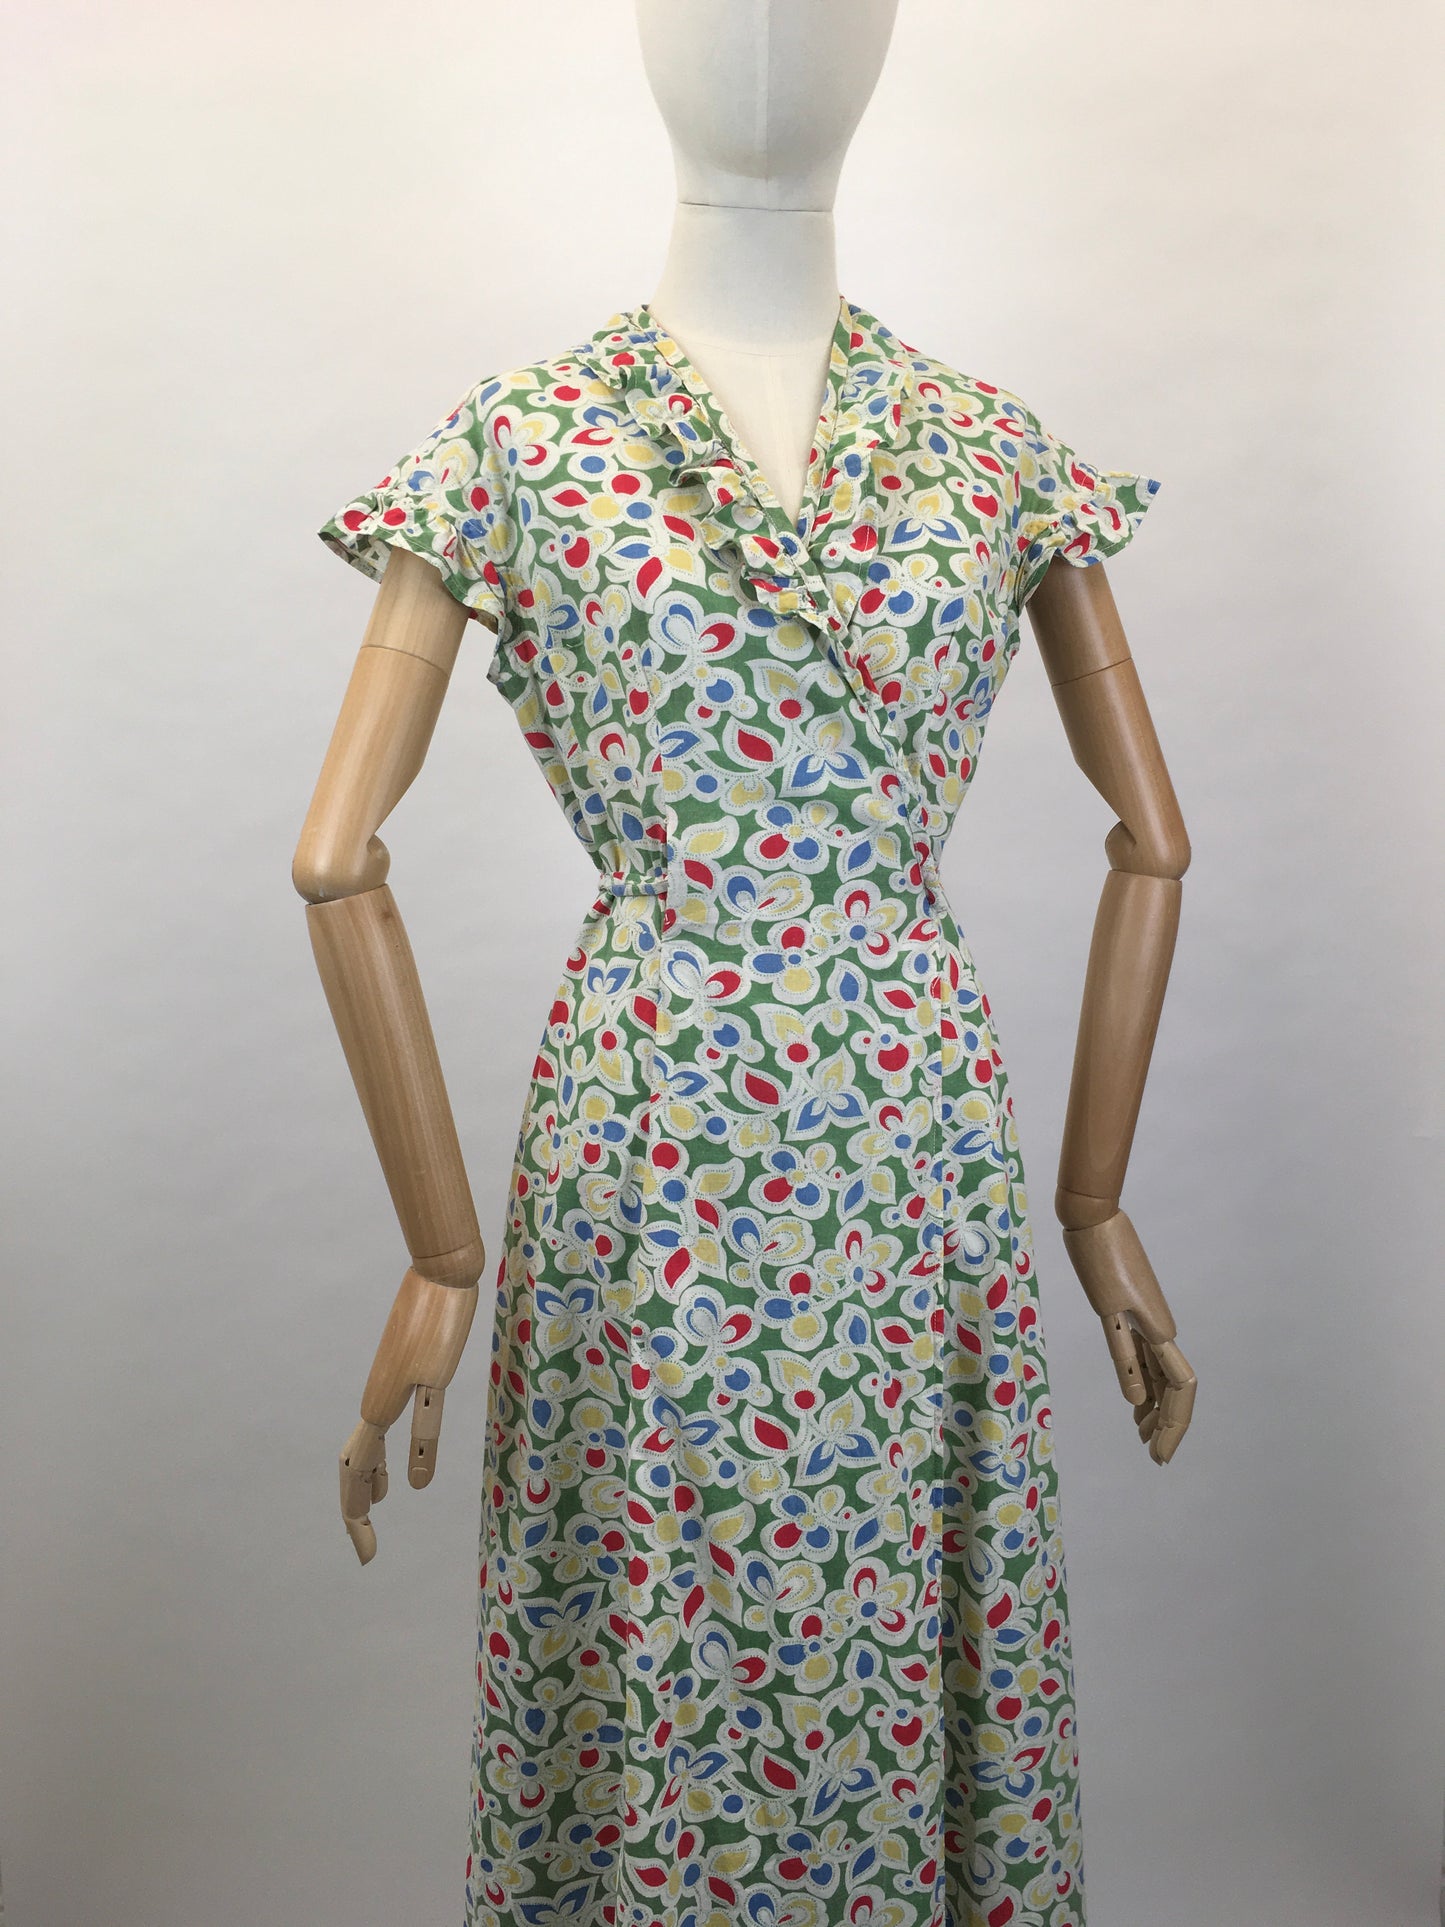 Original Late 1930s Early 1940’s Wrap Dress - In A Beautiful Colour Palette of Deco Green, Yellow, Red and Blue